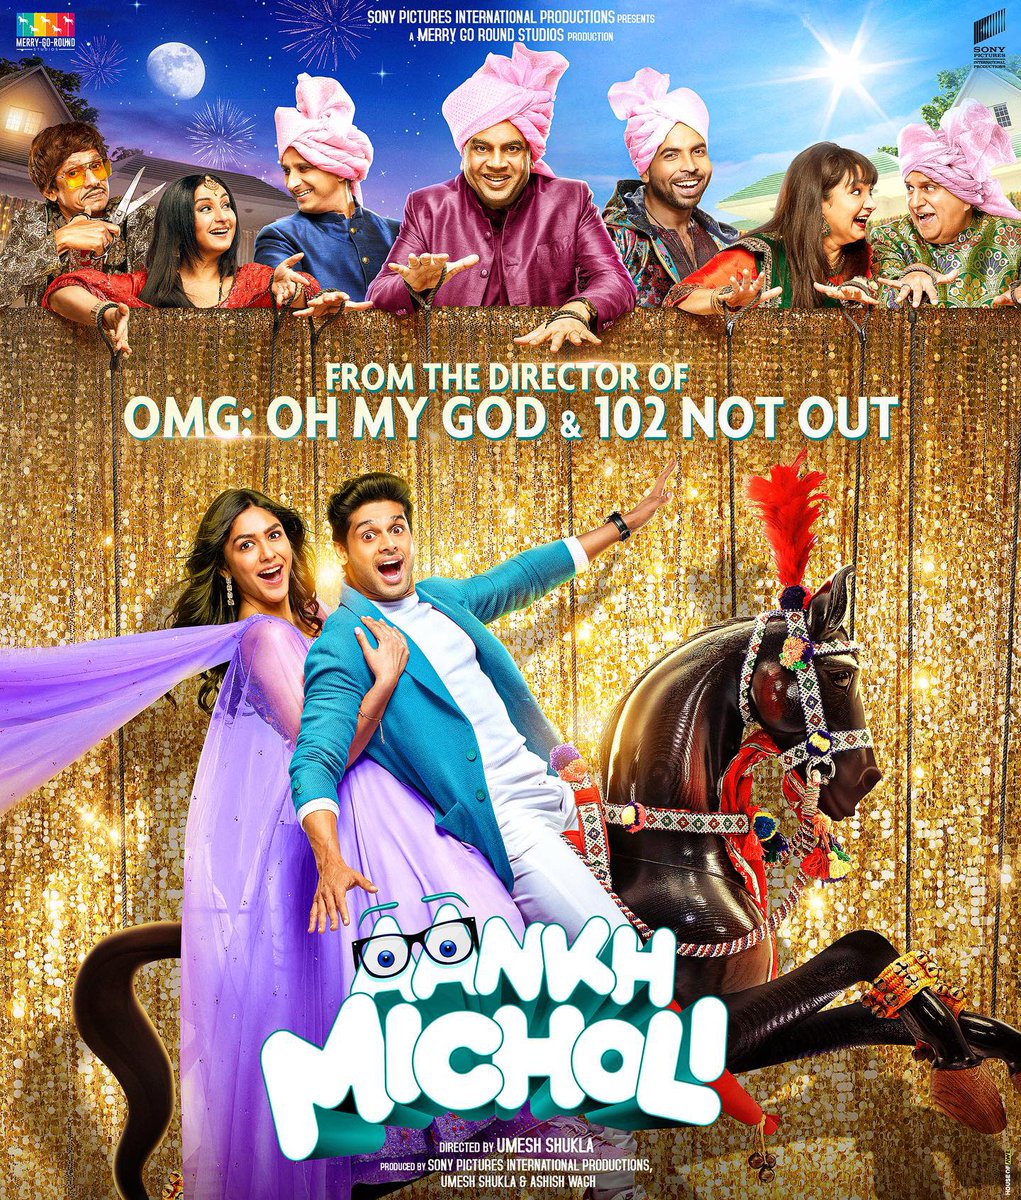 🎉 After a long wait, #AbhimanyuDasani and #MrunalThakur are all set to entertain us in the family comedy #AankhMicholi, directed by the talented #UmeshShukla, known for “#OMG - Oh My God.” With a stellar cast including #PareshRawal, #SharmanJoshi, and #DivyaDutta, the movie is